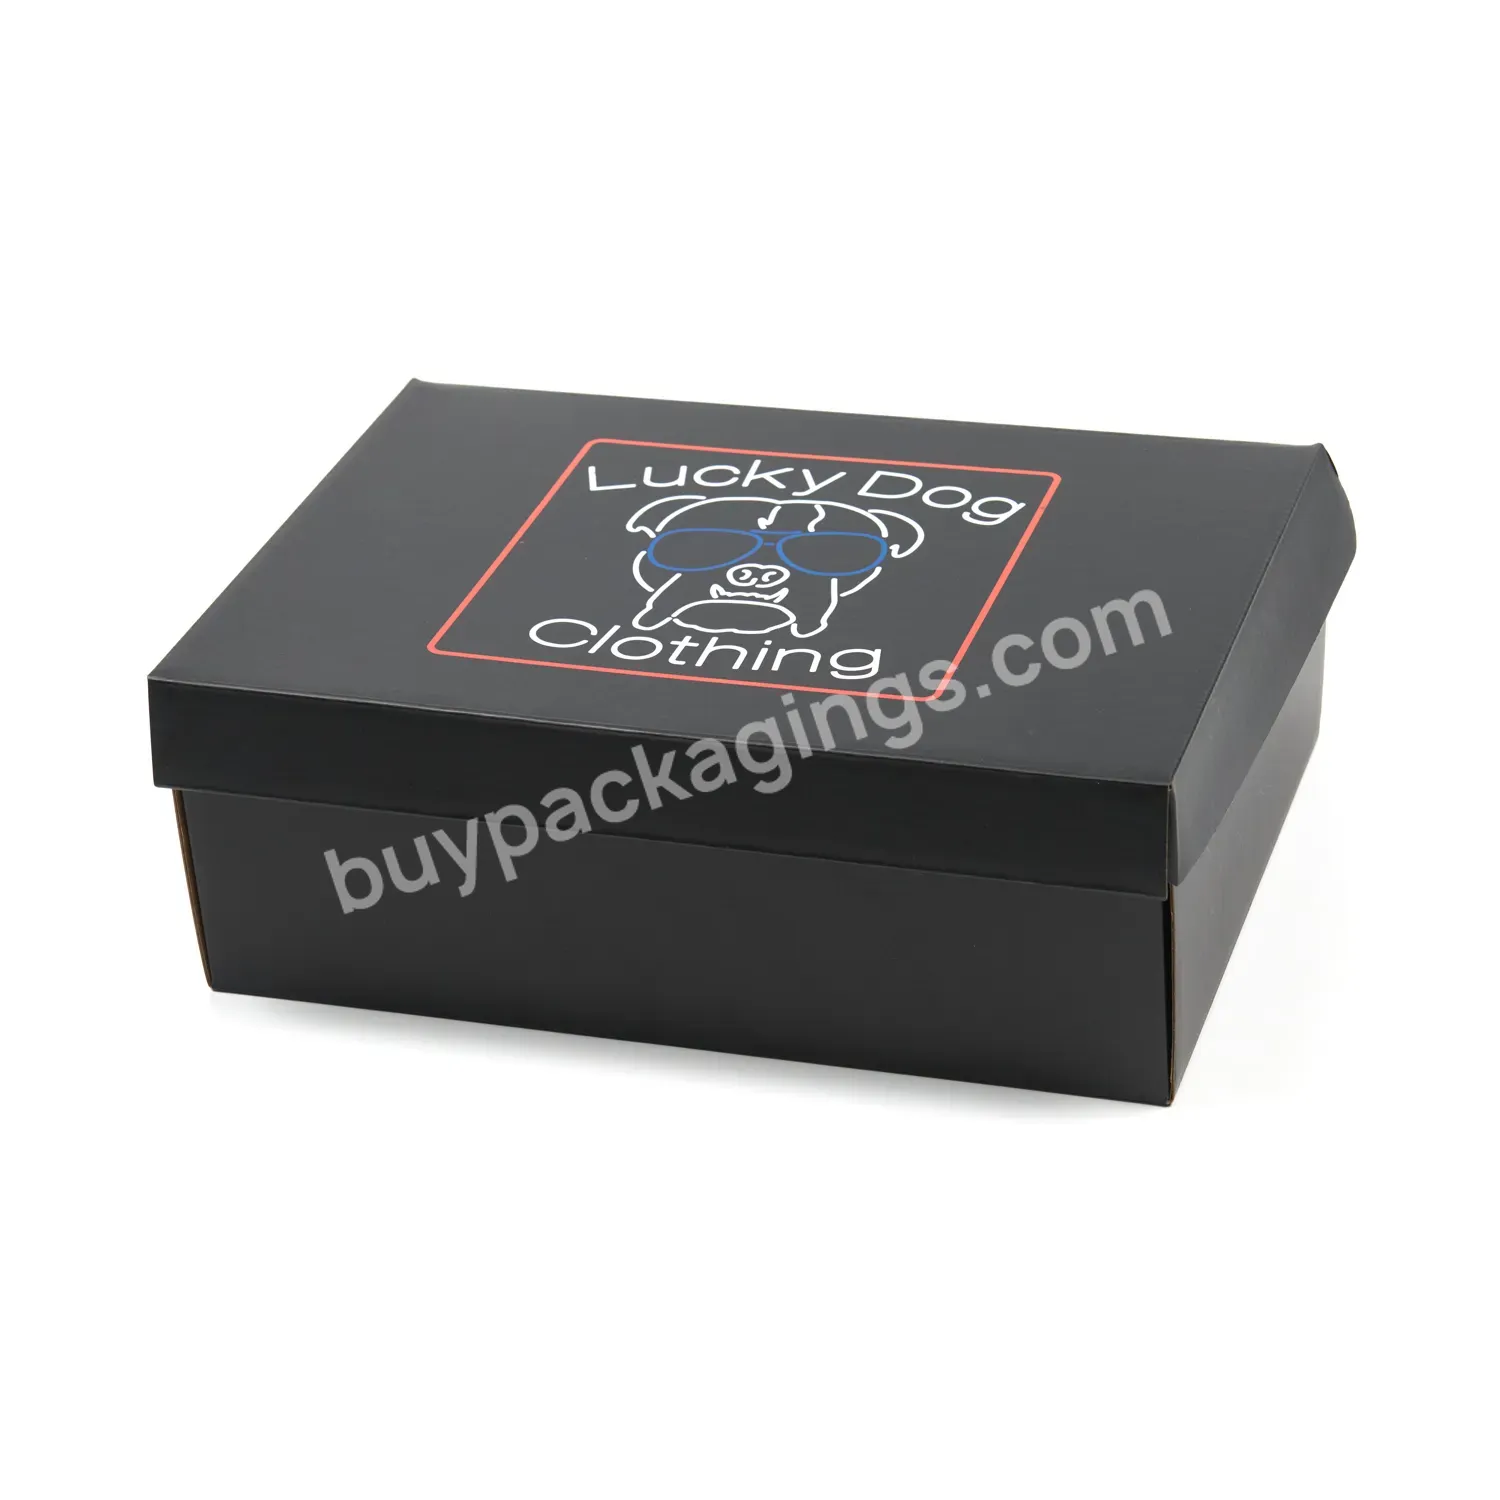 China Supplier Fedora Hat Box Mailer Box Manufacture Customized Colored Hat Packaging Box With Handle